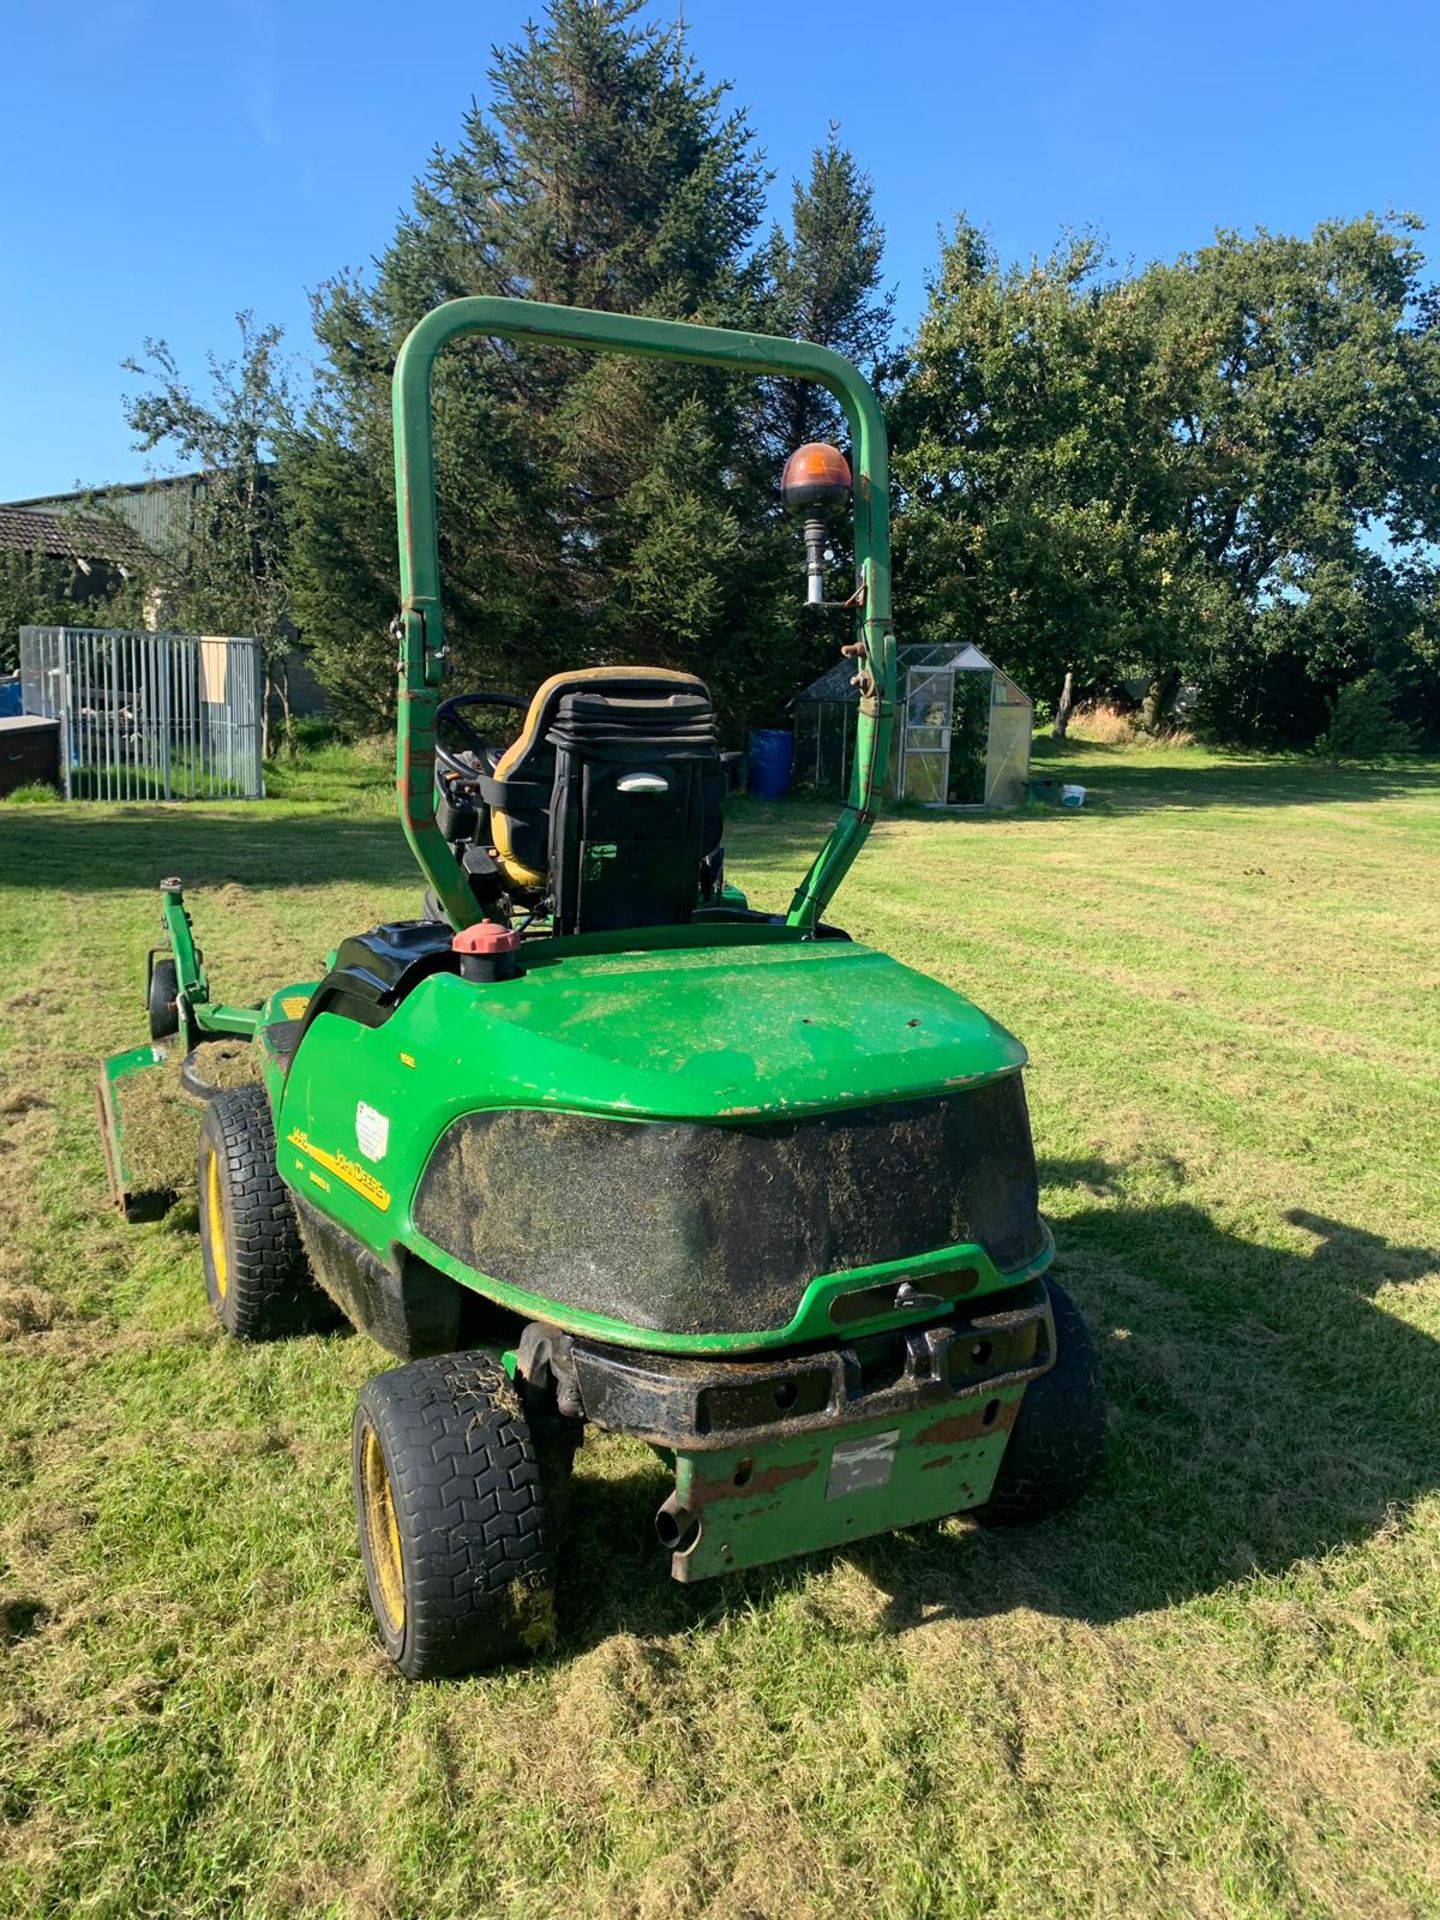 JOHN DEERE 1445 SERIES II 4WD RIDE ON DIESEL LAWN MOWER C/W OUT-FRONT ROTARY CUTTING DECK *PLUS VAT* - Image 10 of 14